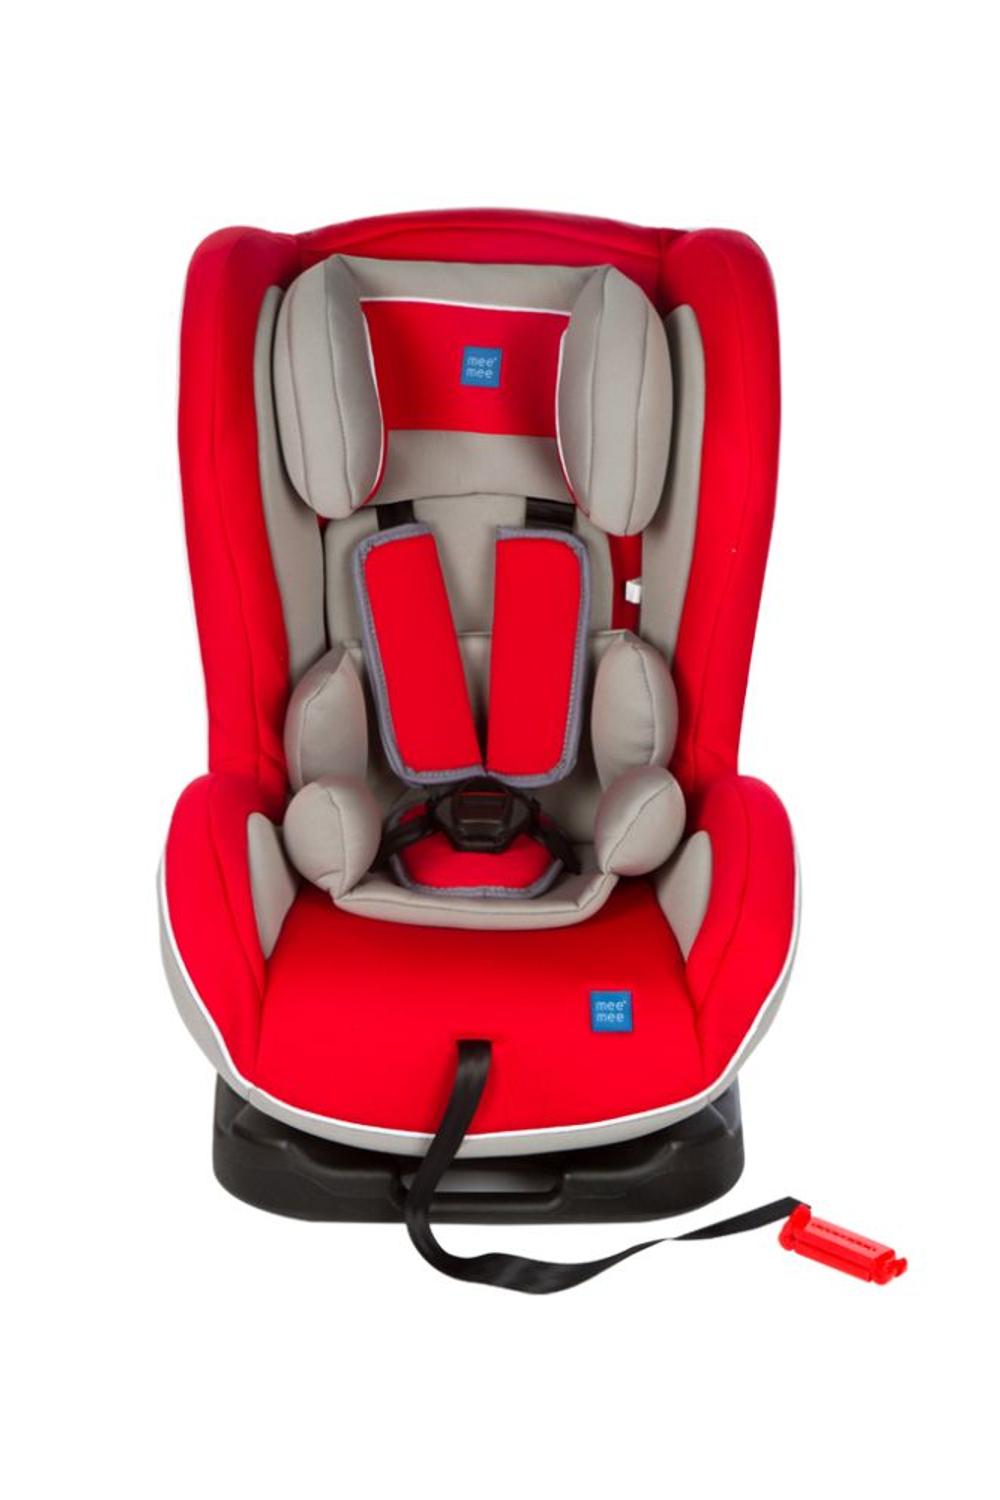 Mee Mee Grow with me Convertible Baby Car Seat (Red)